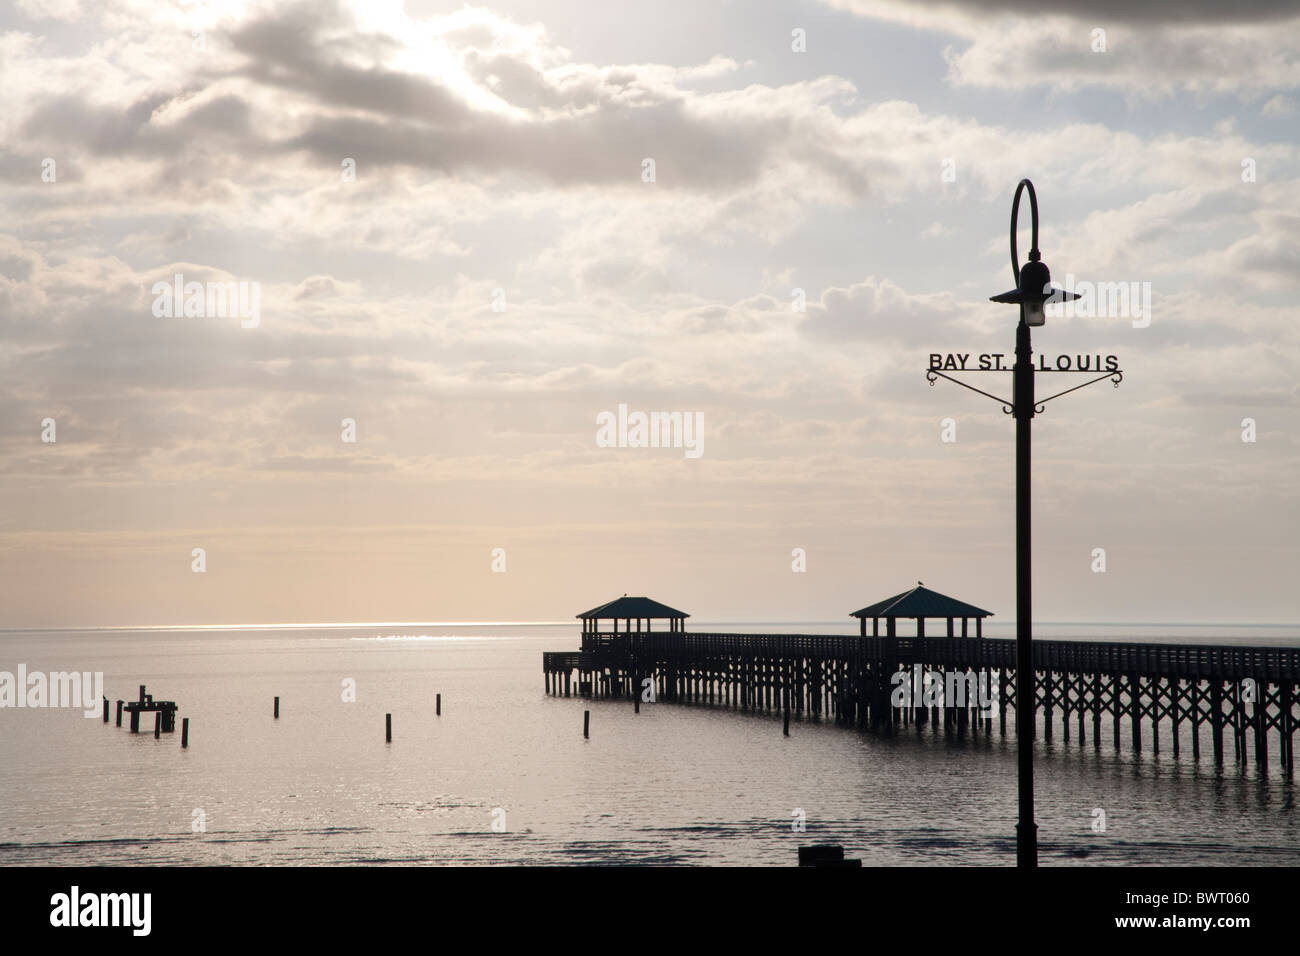 Winter sunshine on the Gulf of Mexico, Bay St Louis, MS. Stock Photo